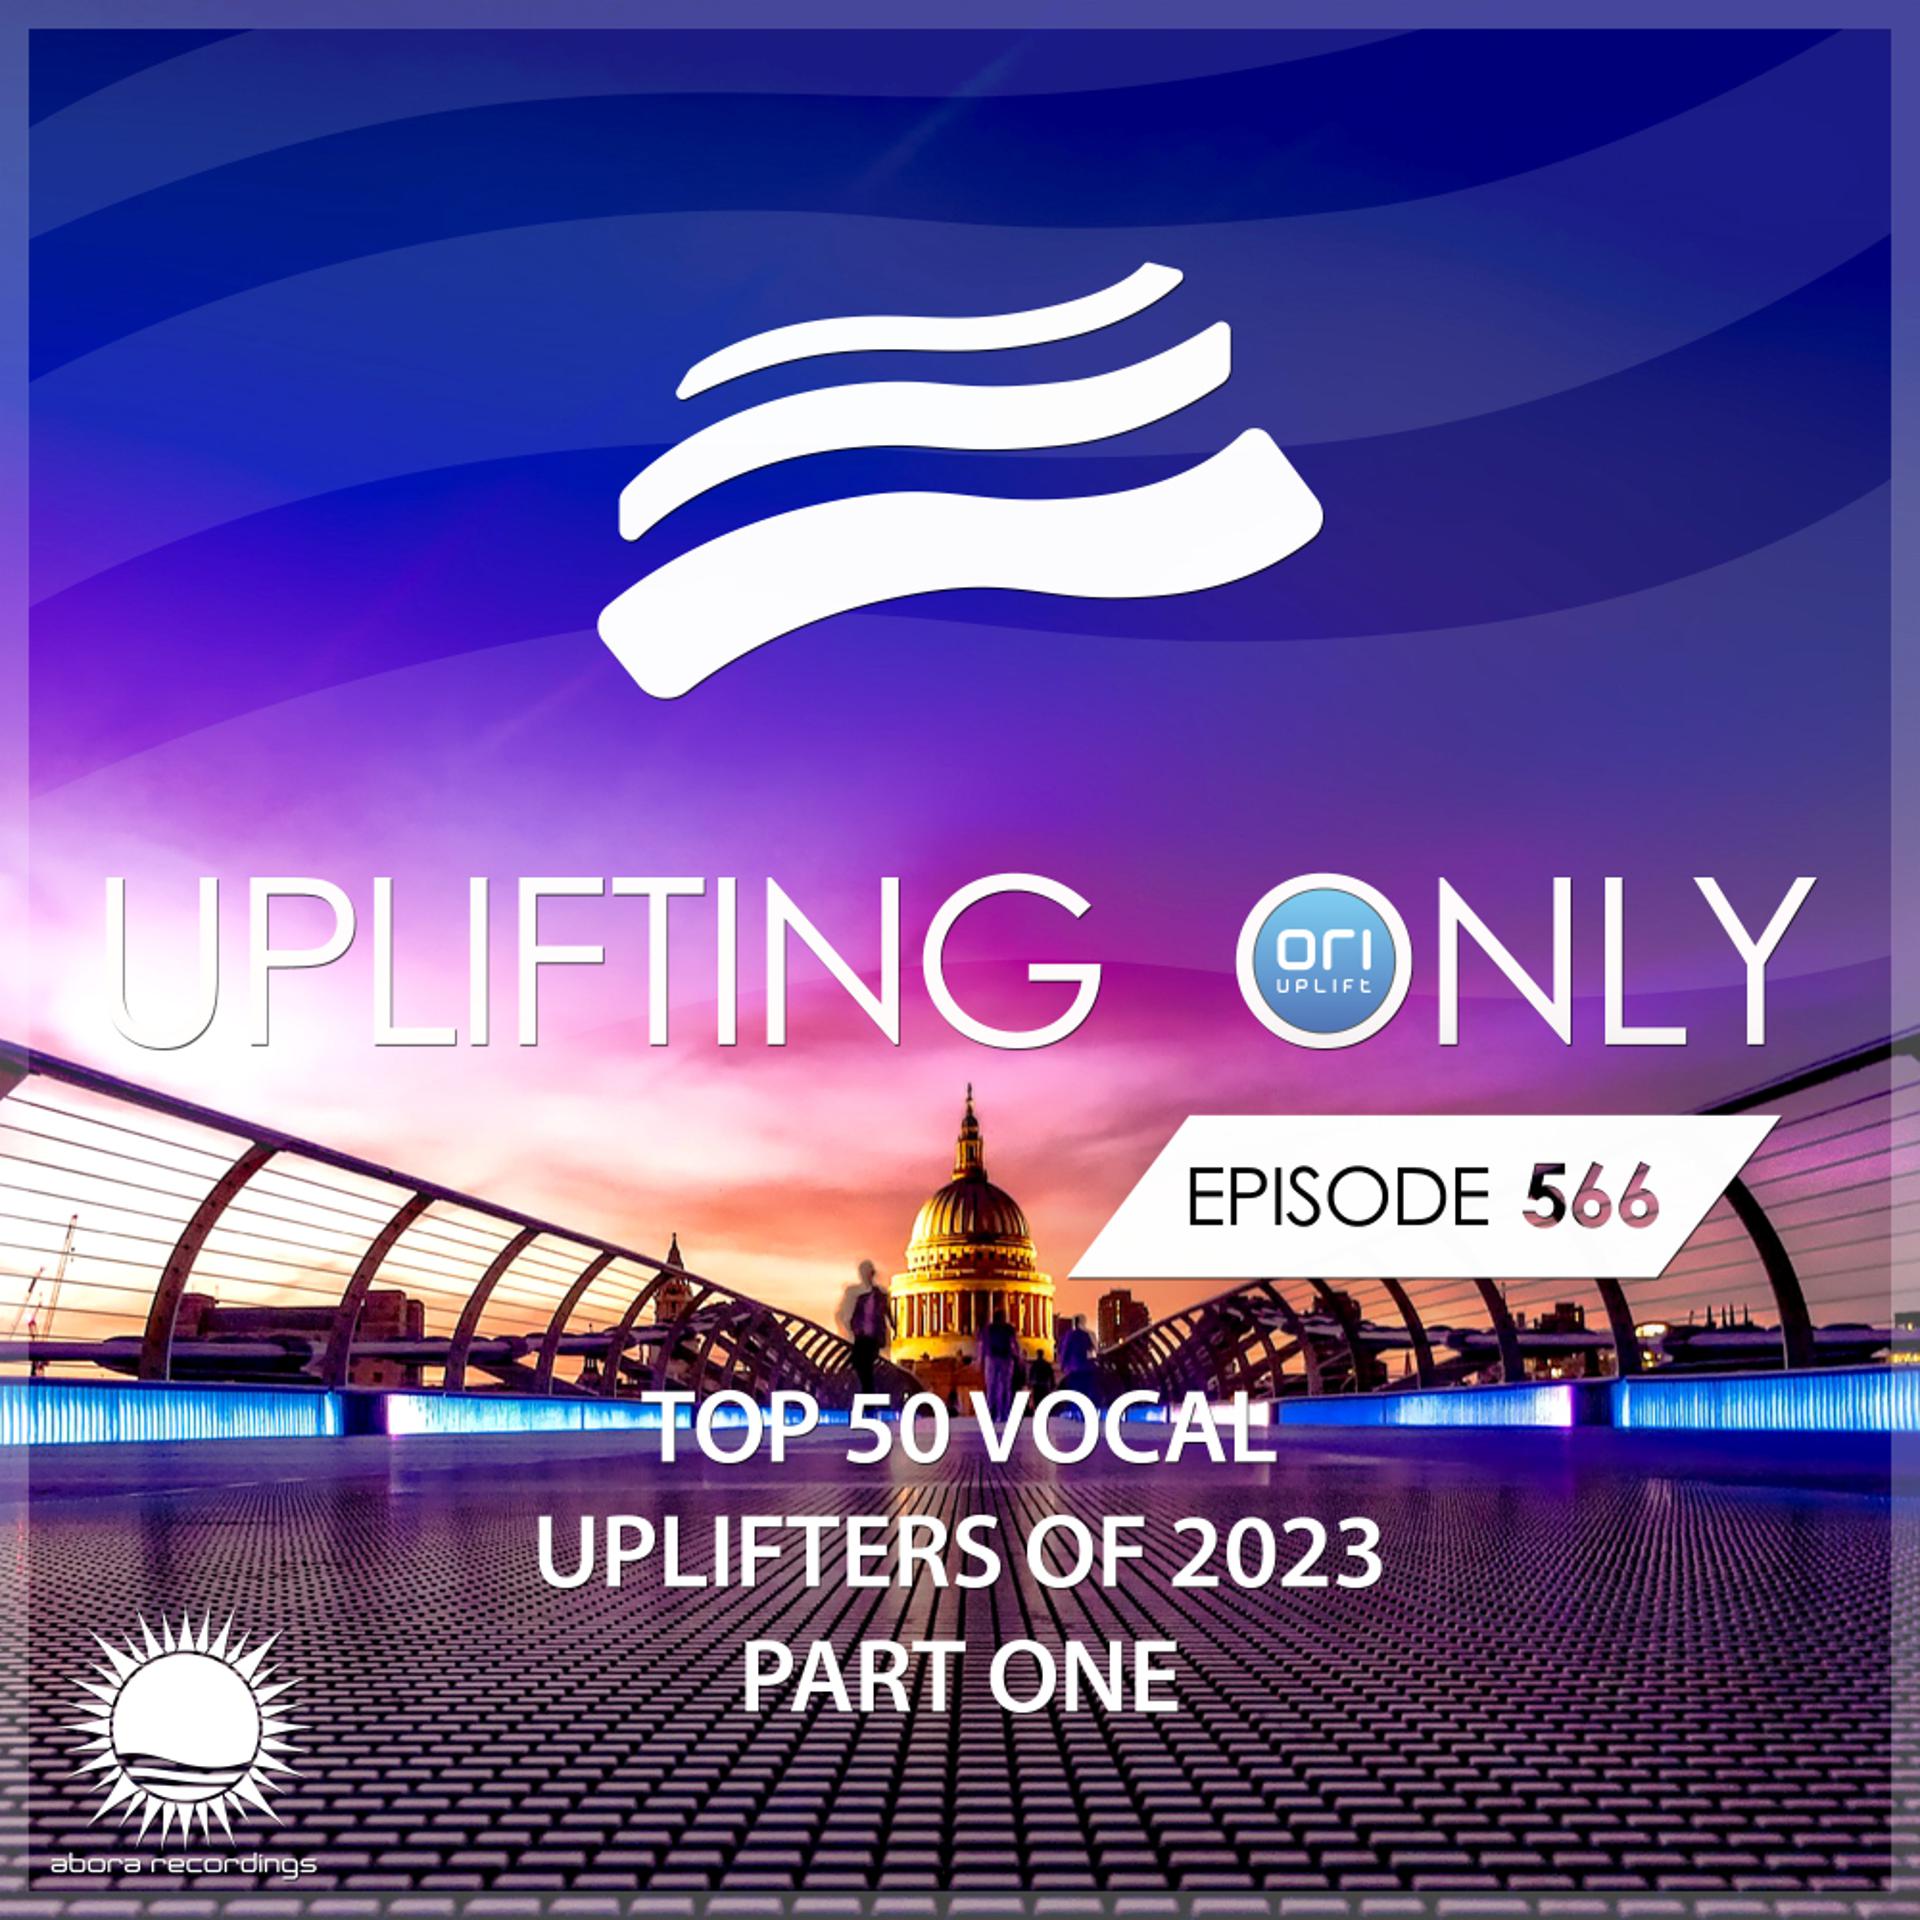 Постер альбома Uplifting Only 566: No-Talking DJ Mix: Ori's Top 50 Vocal Uplifters of 2023 - Part 1 [FULL]